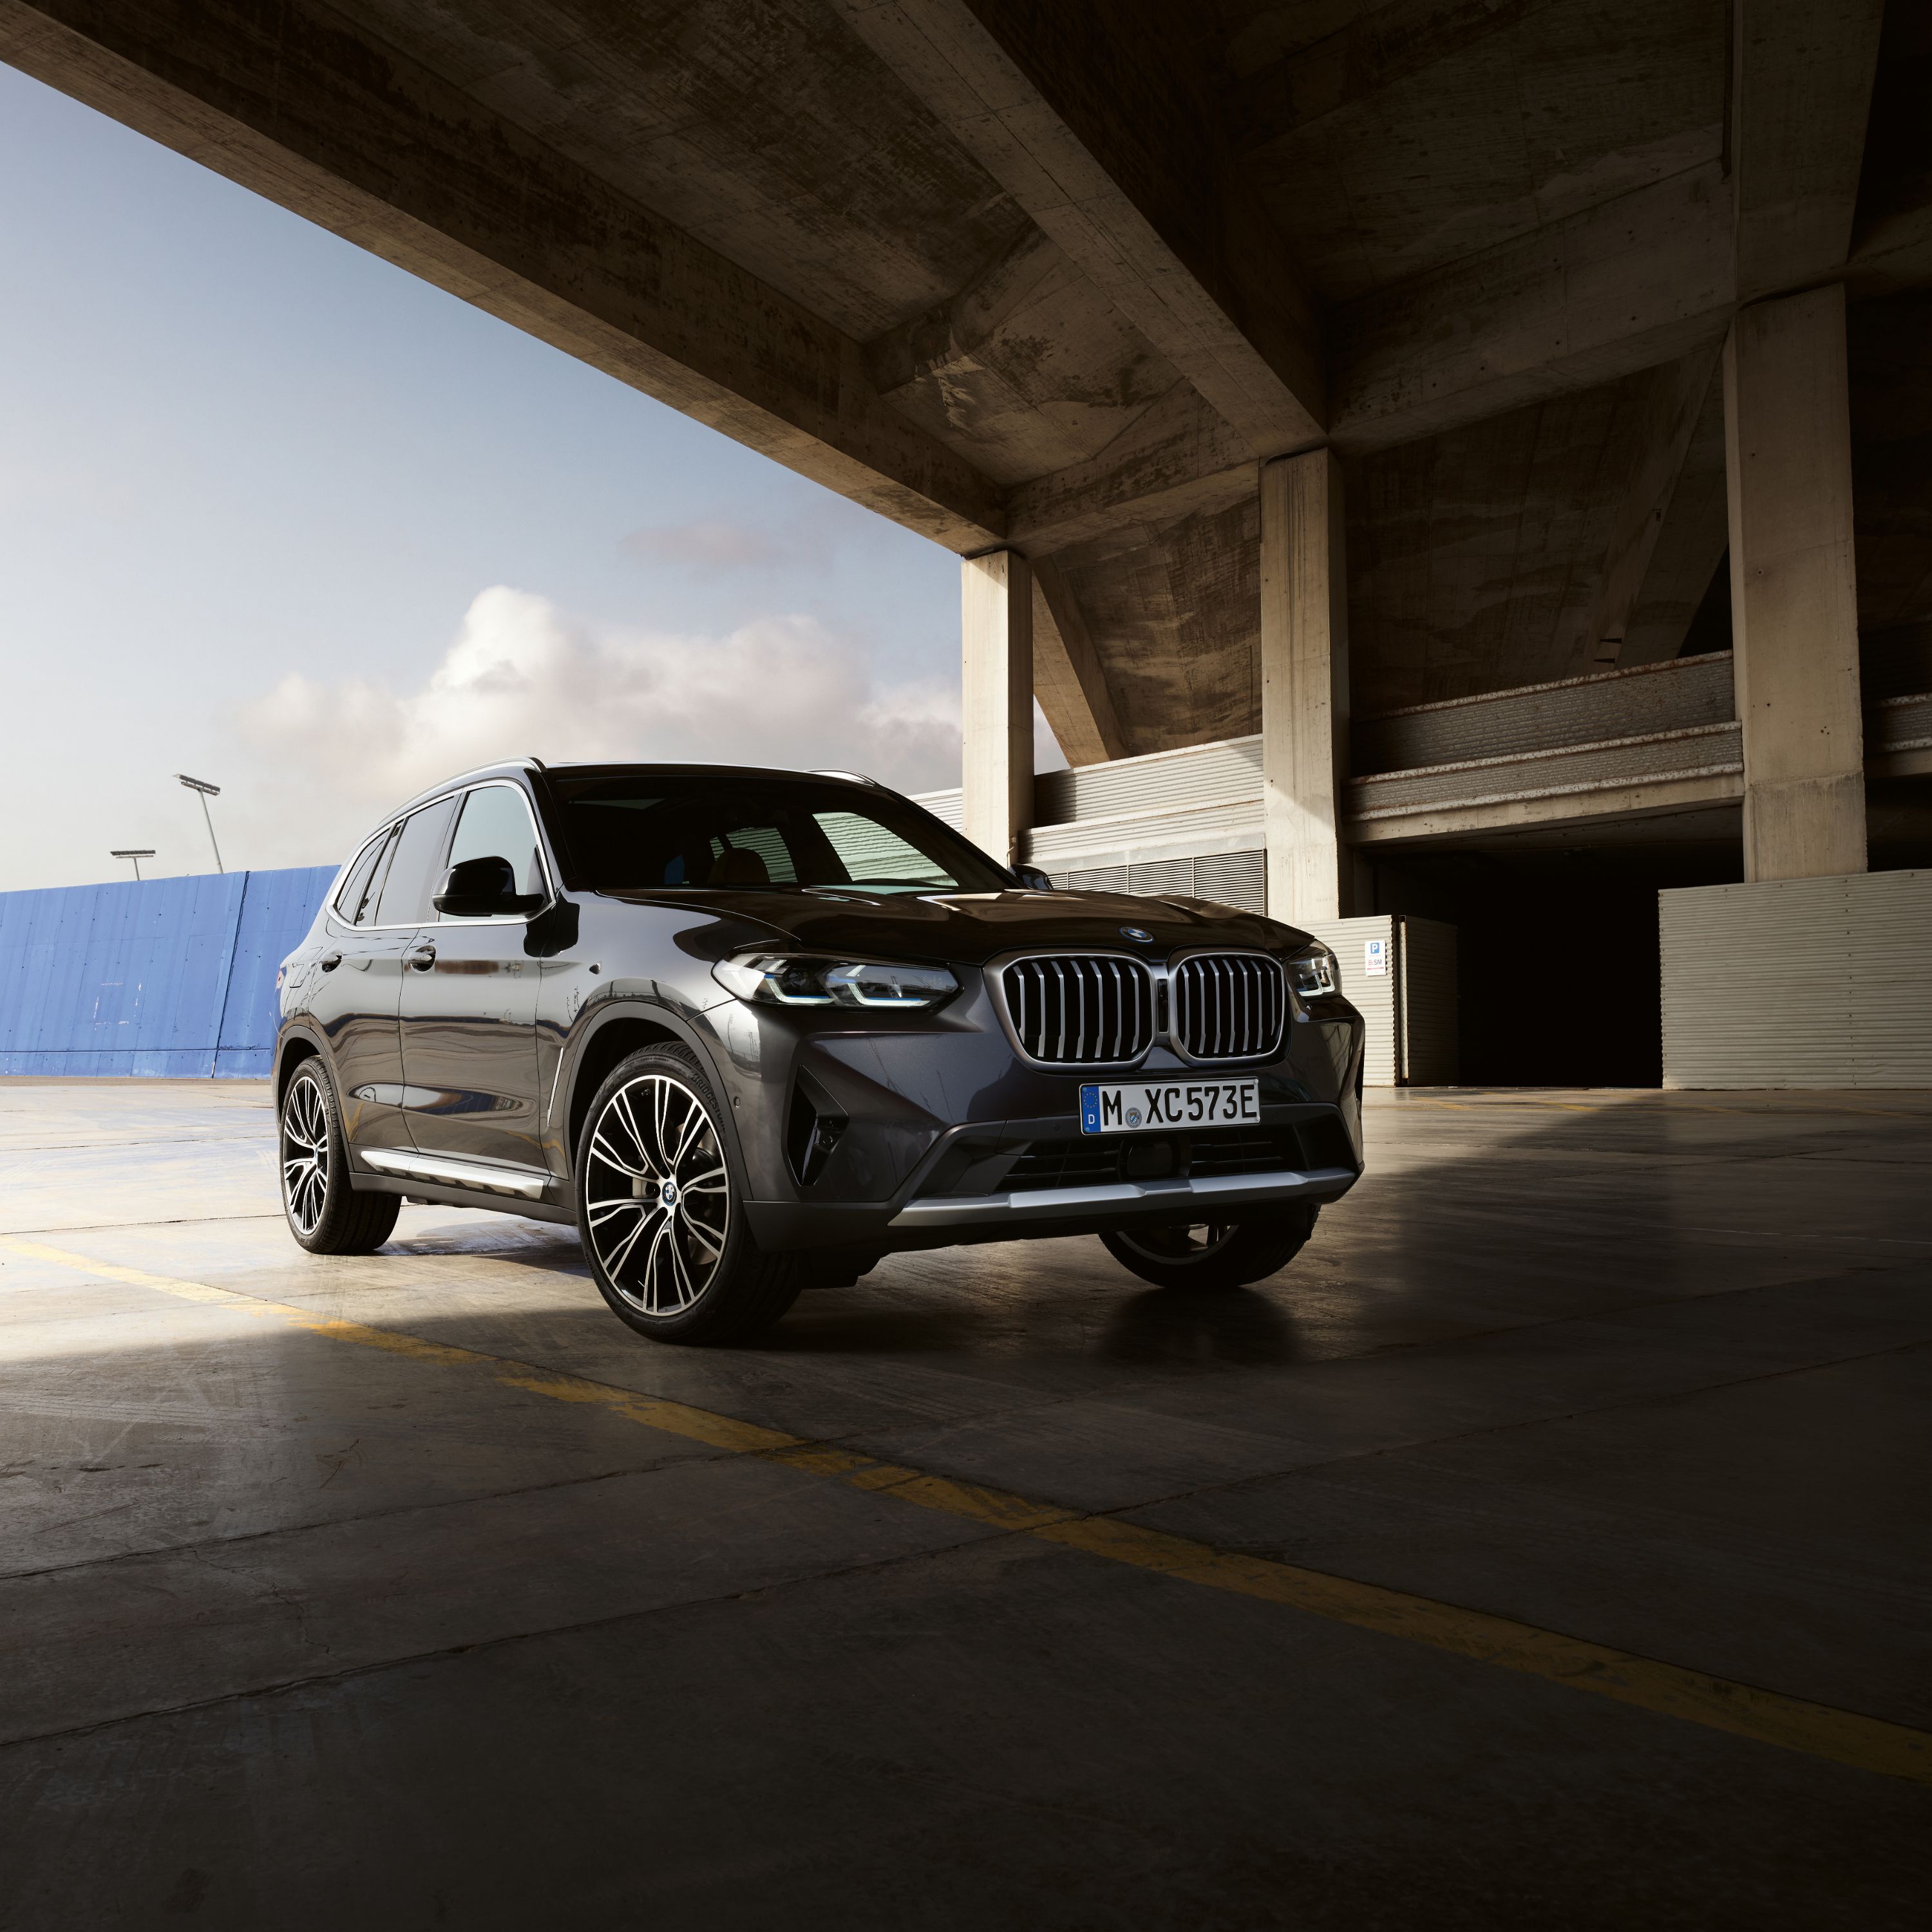 BMW X3 G01 SUV parked beneath a underpass of an industrial complex